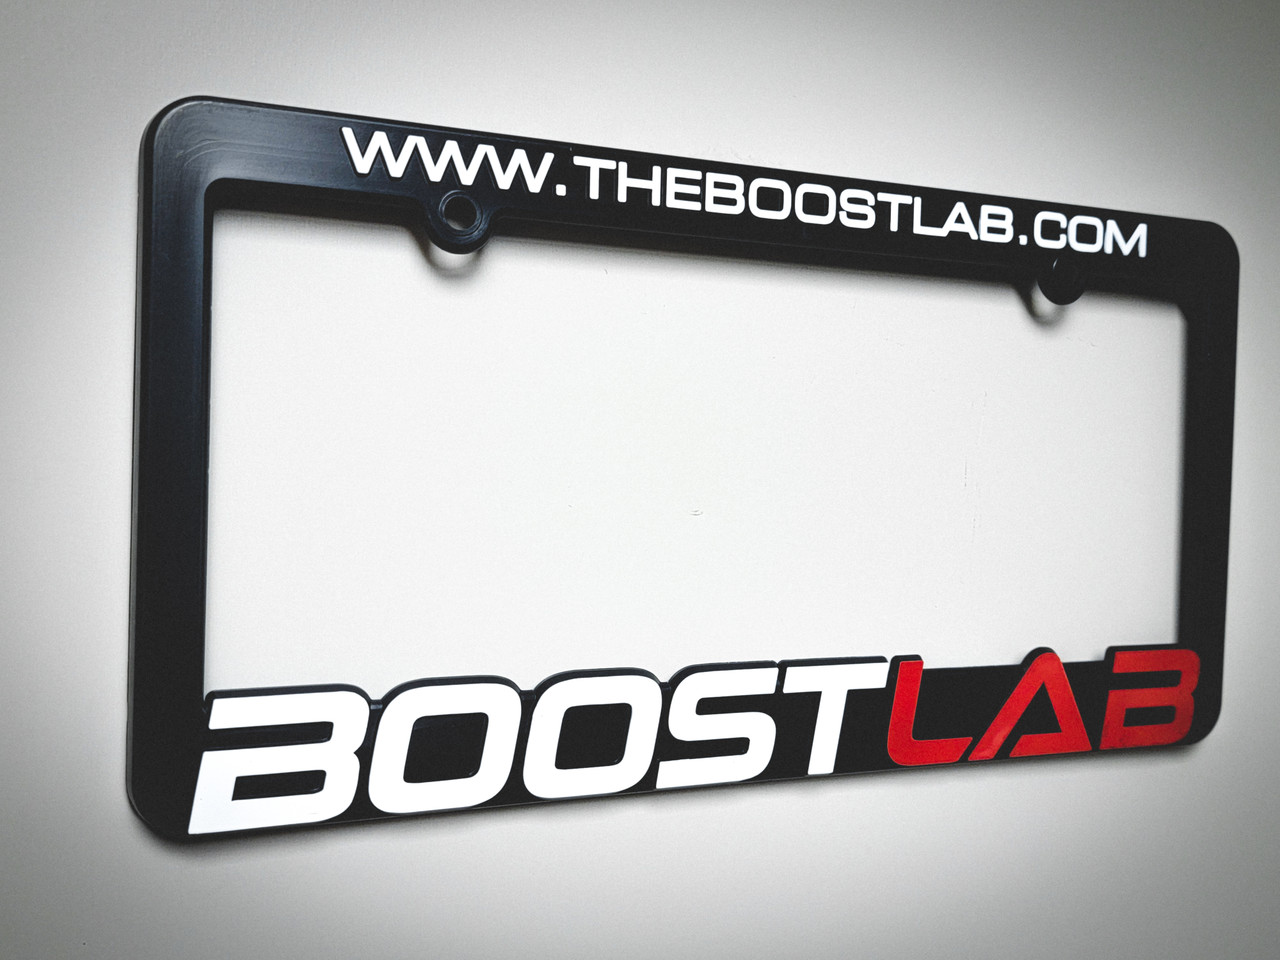 MULTI-COLOR powered by TURBO DIESEL license plate frame for any Turbocharged cars